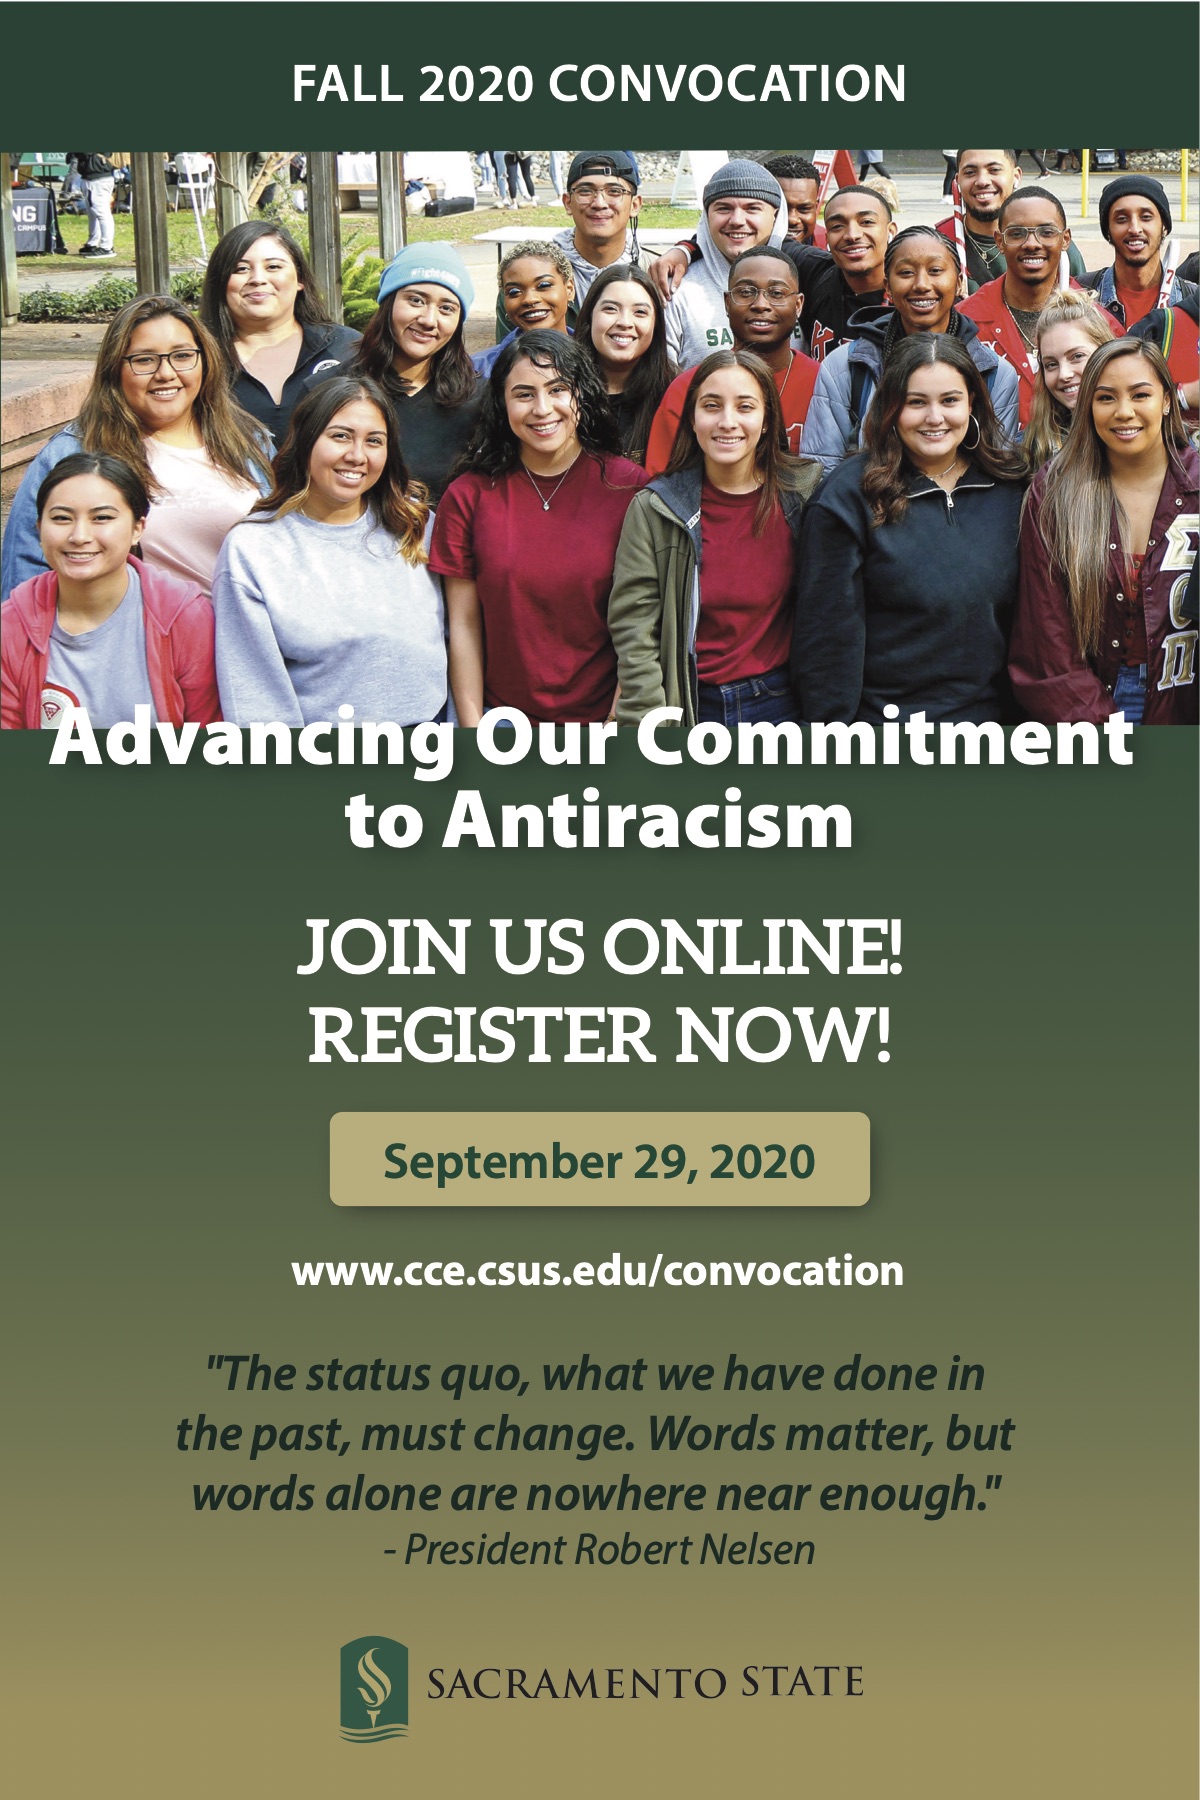 Fall 2020 Convocation flyer